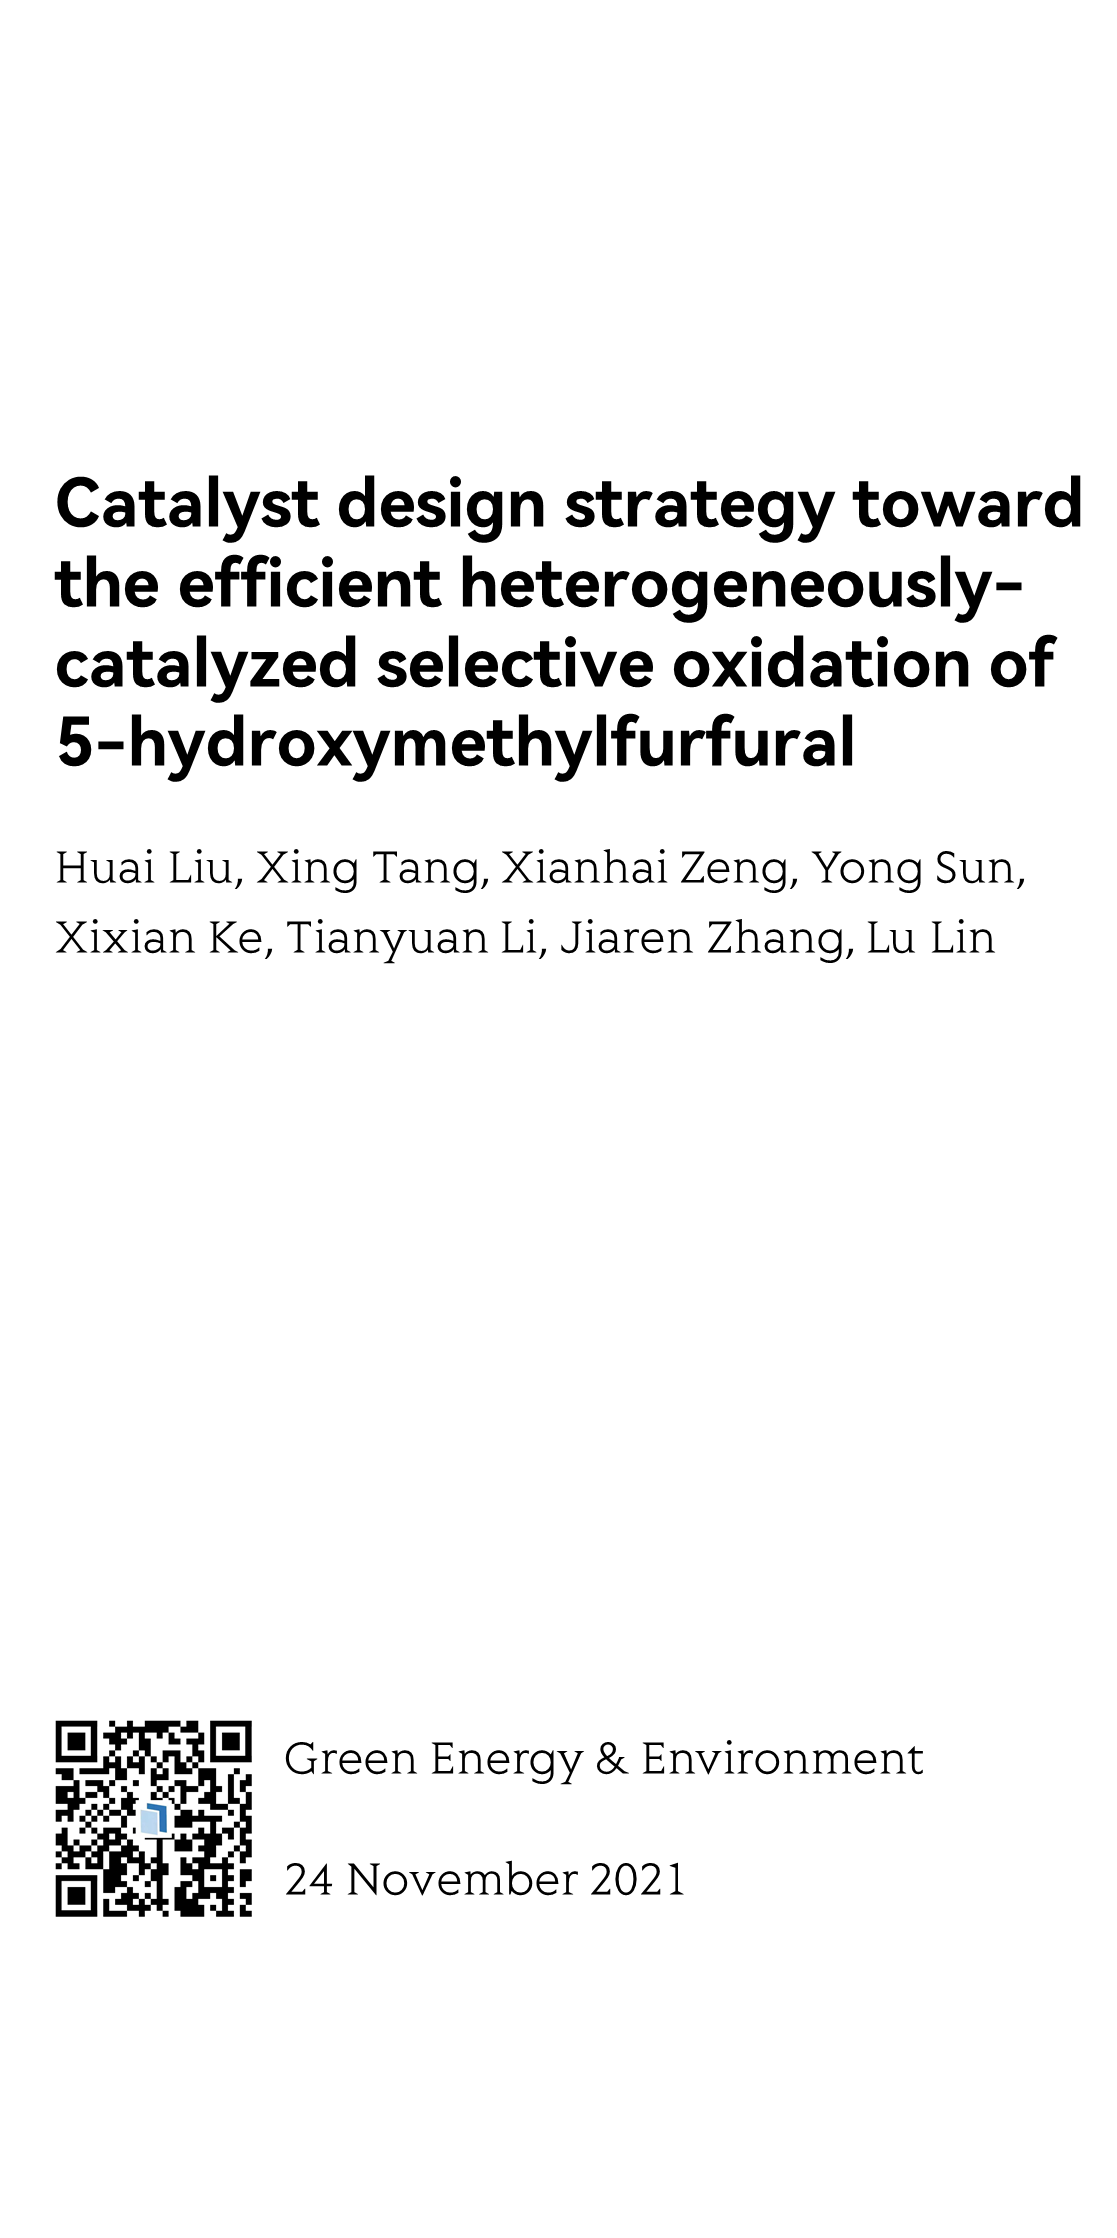 Catalyst design strategy toward the efficient heterogeneously-catalyzed selective oxidation of 5-hydroxymethylfurfural_1